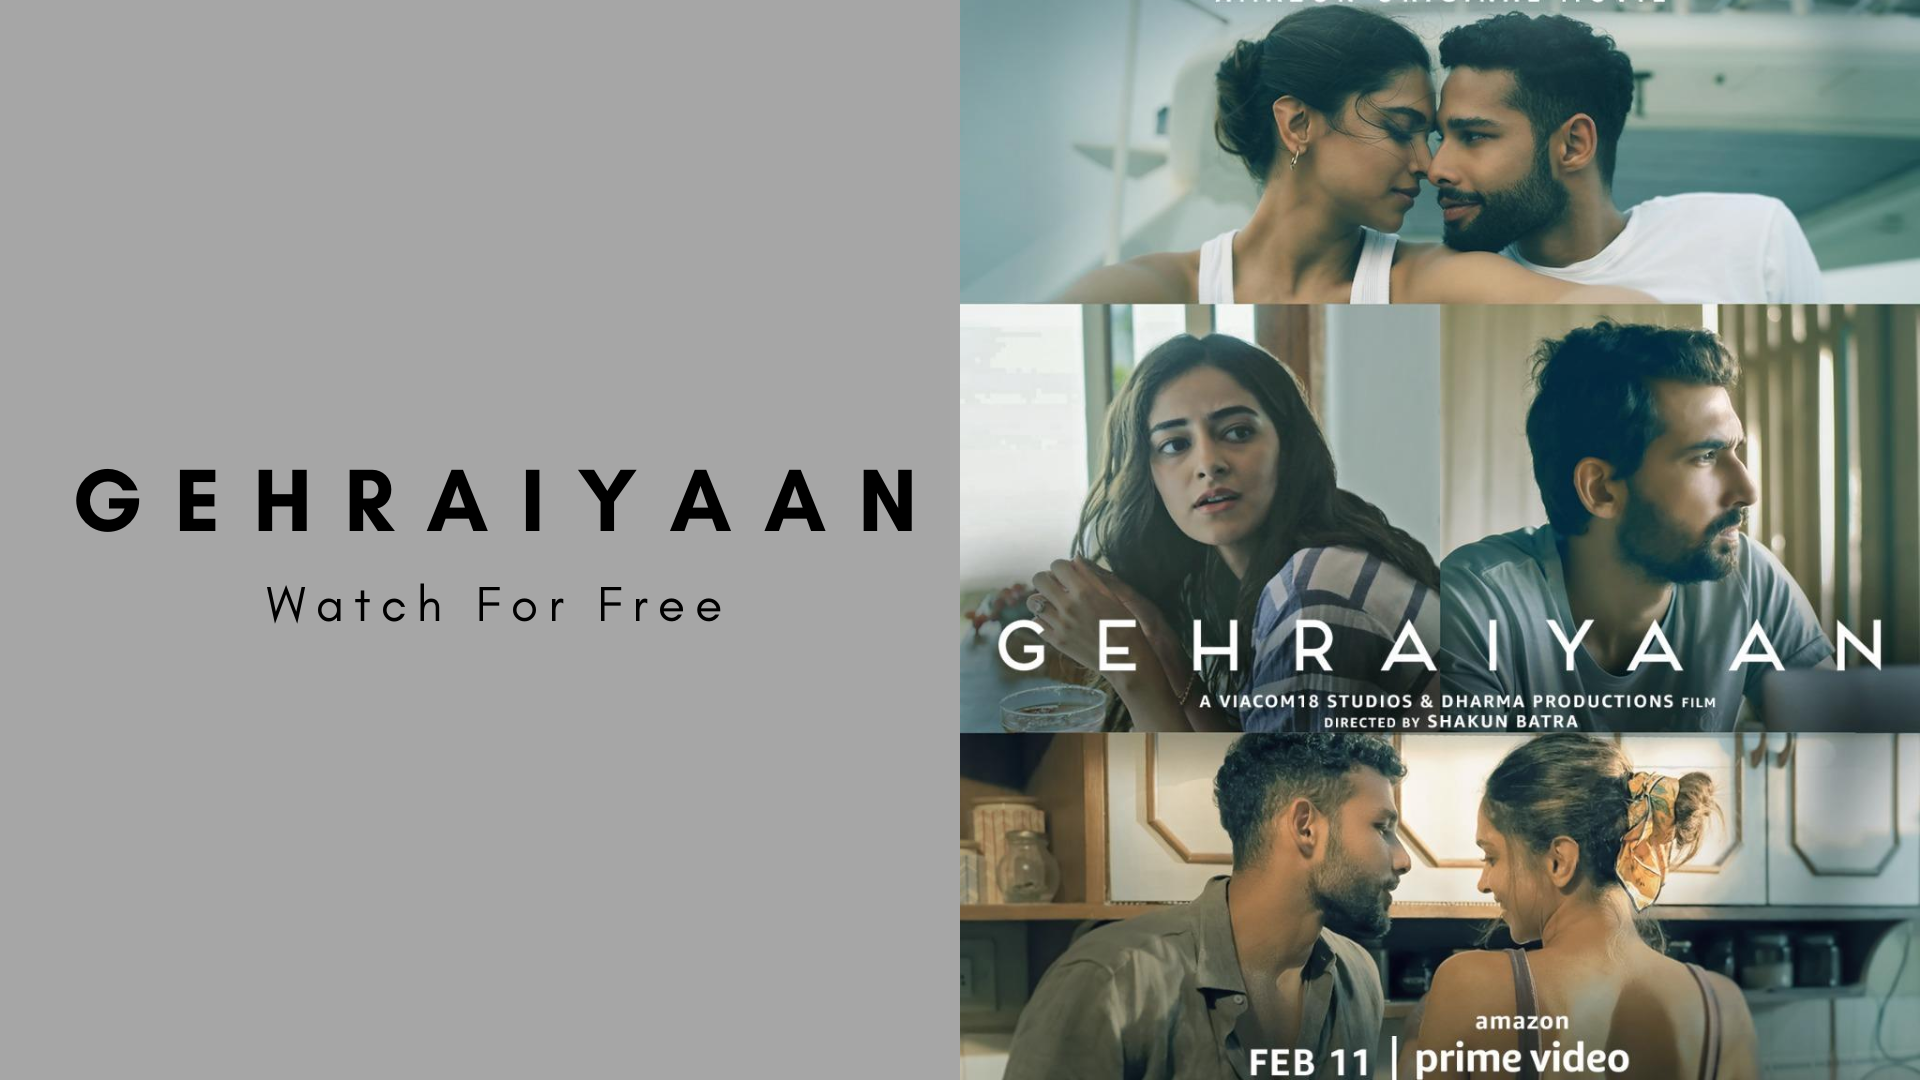 How To Watch Gehraiyaan on Amazon Prime For Free?